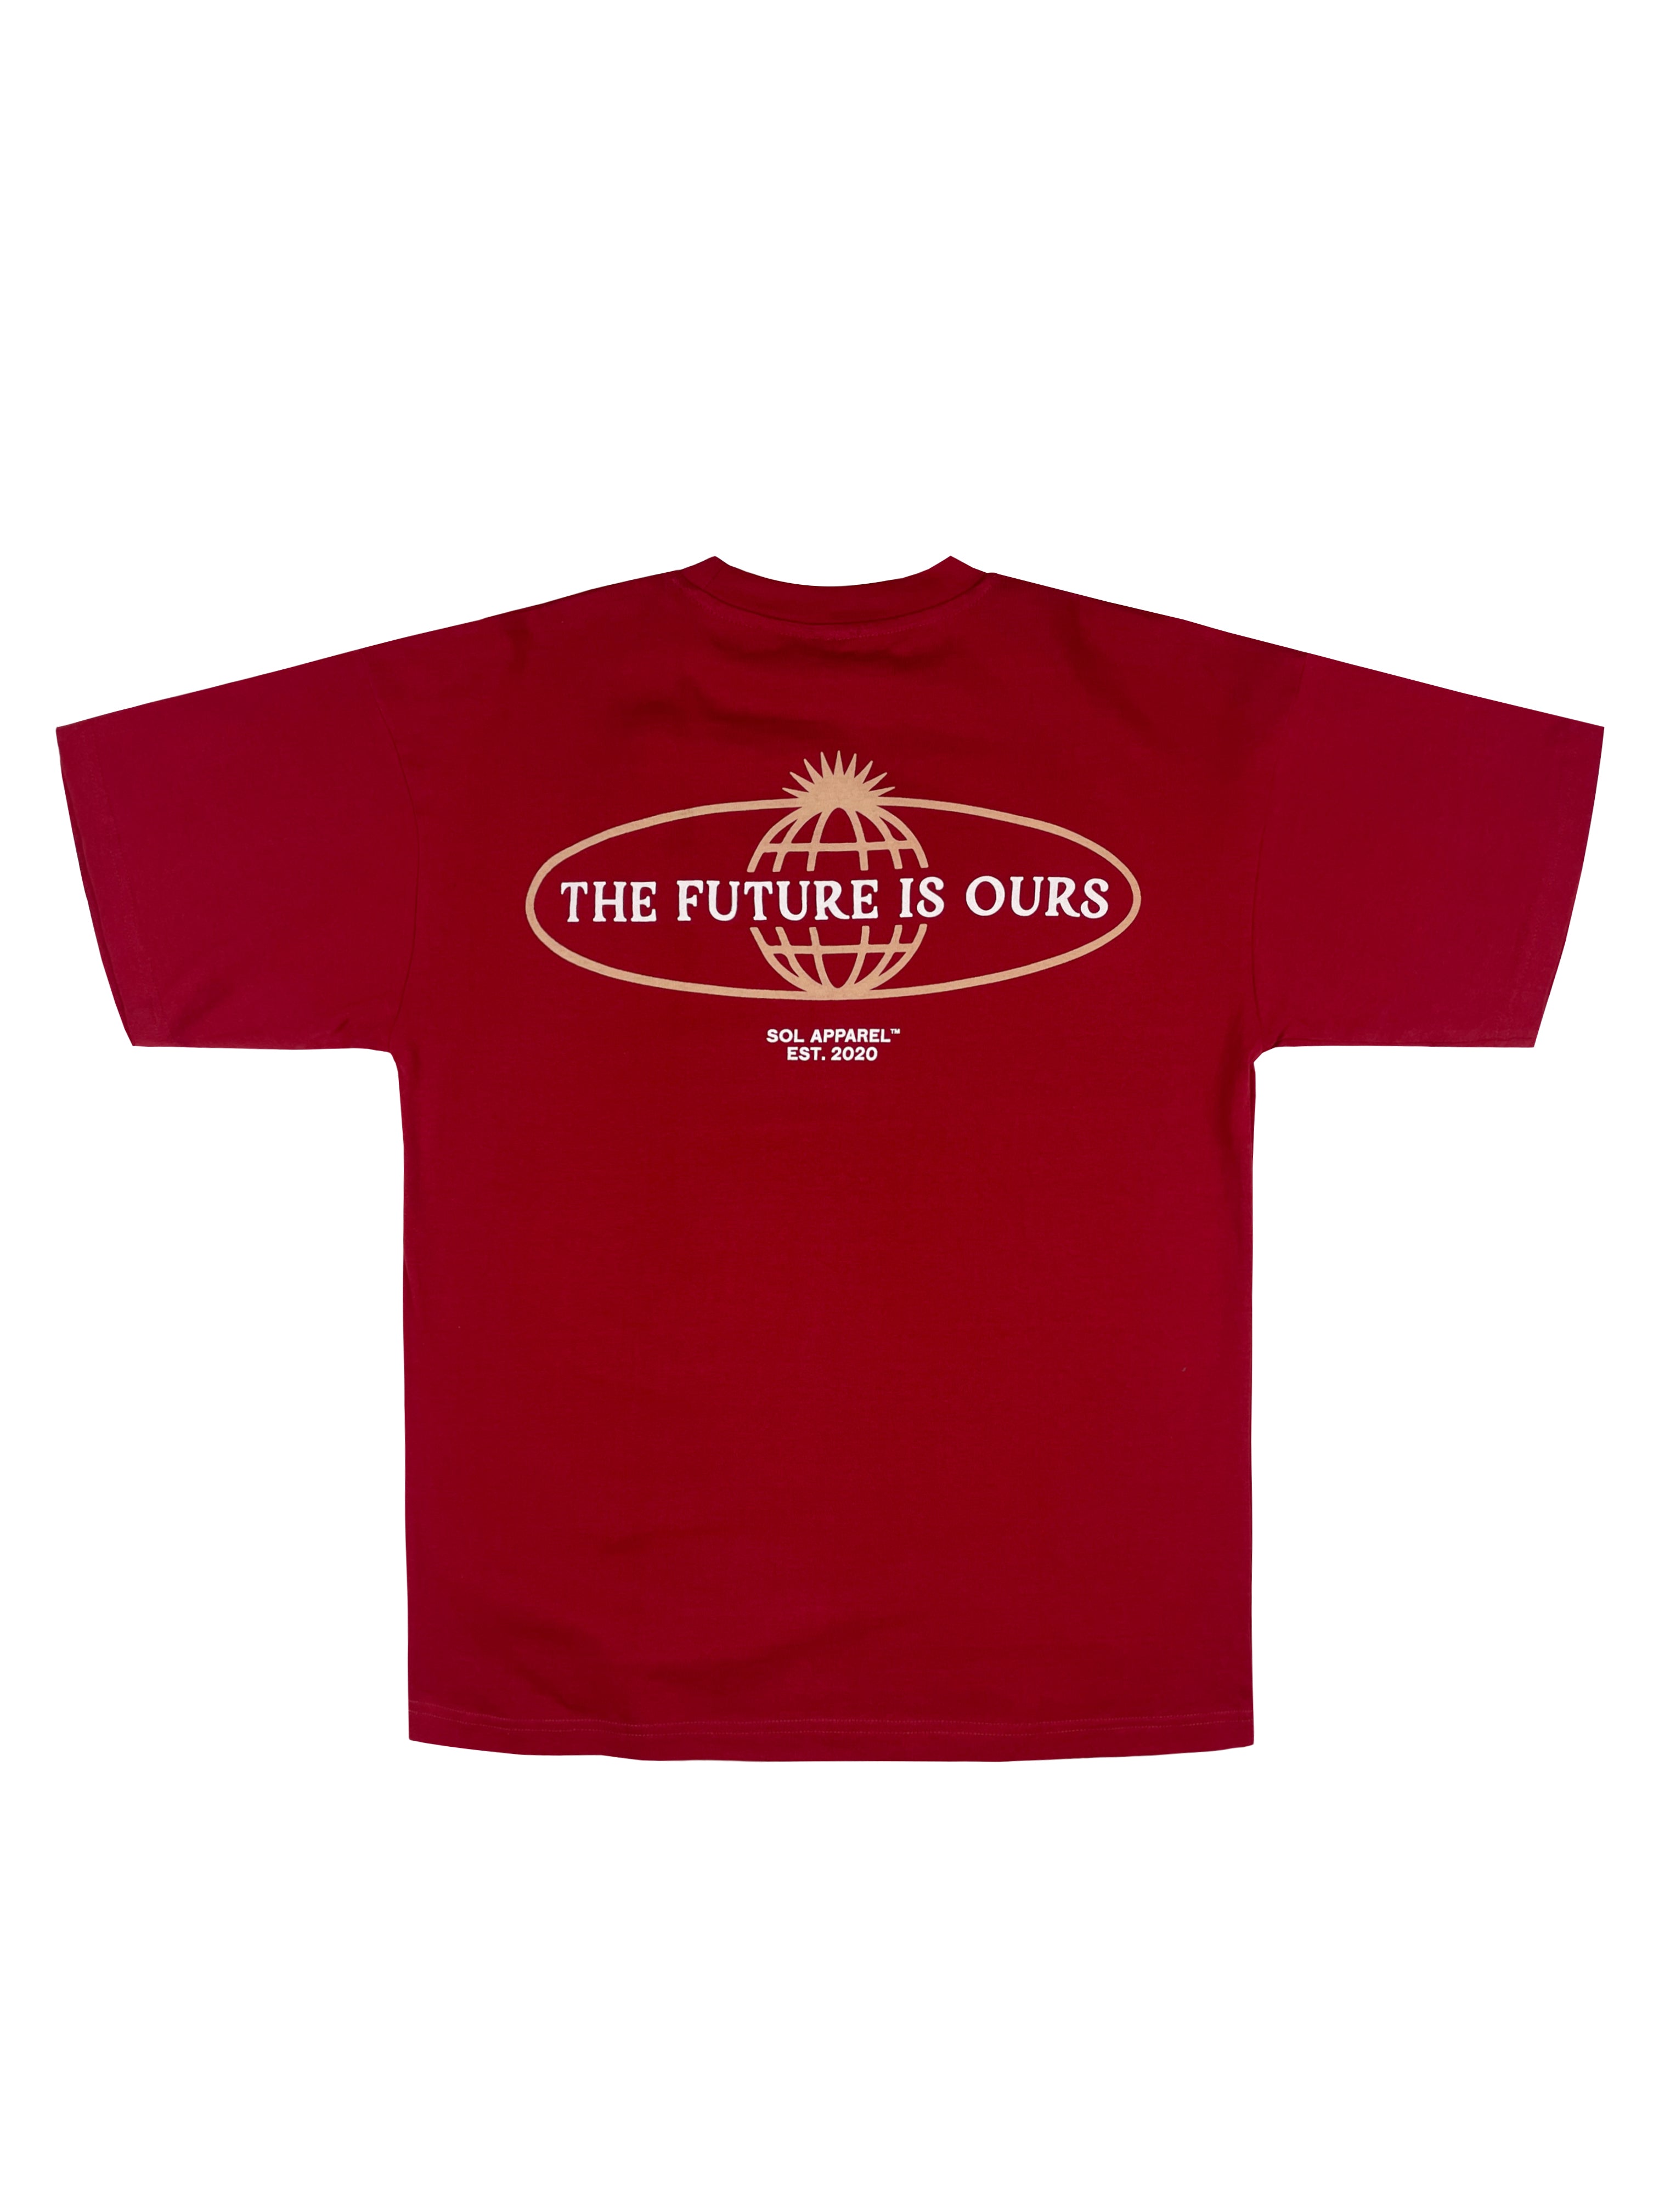 red cotton oversized tee with logo that says the future is ours in white writing